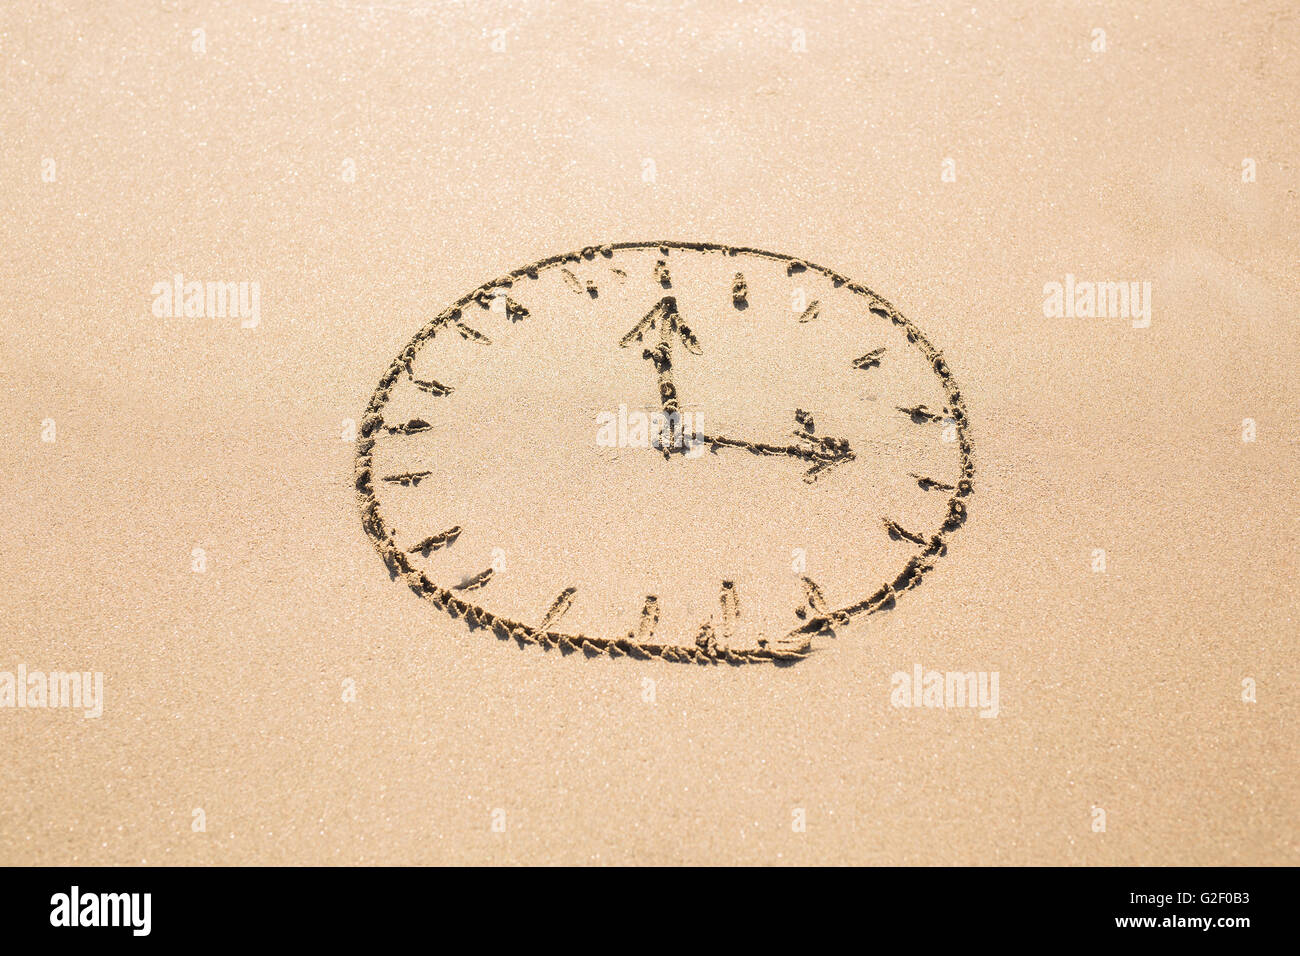 Time concept - Picture of a clock face on sandy beach. Stock Photo